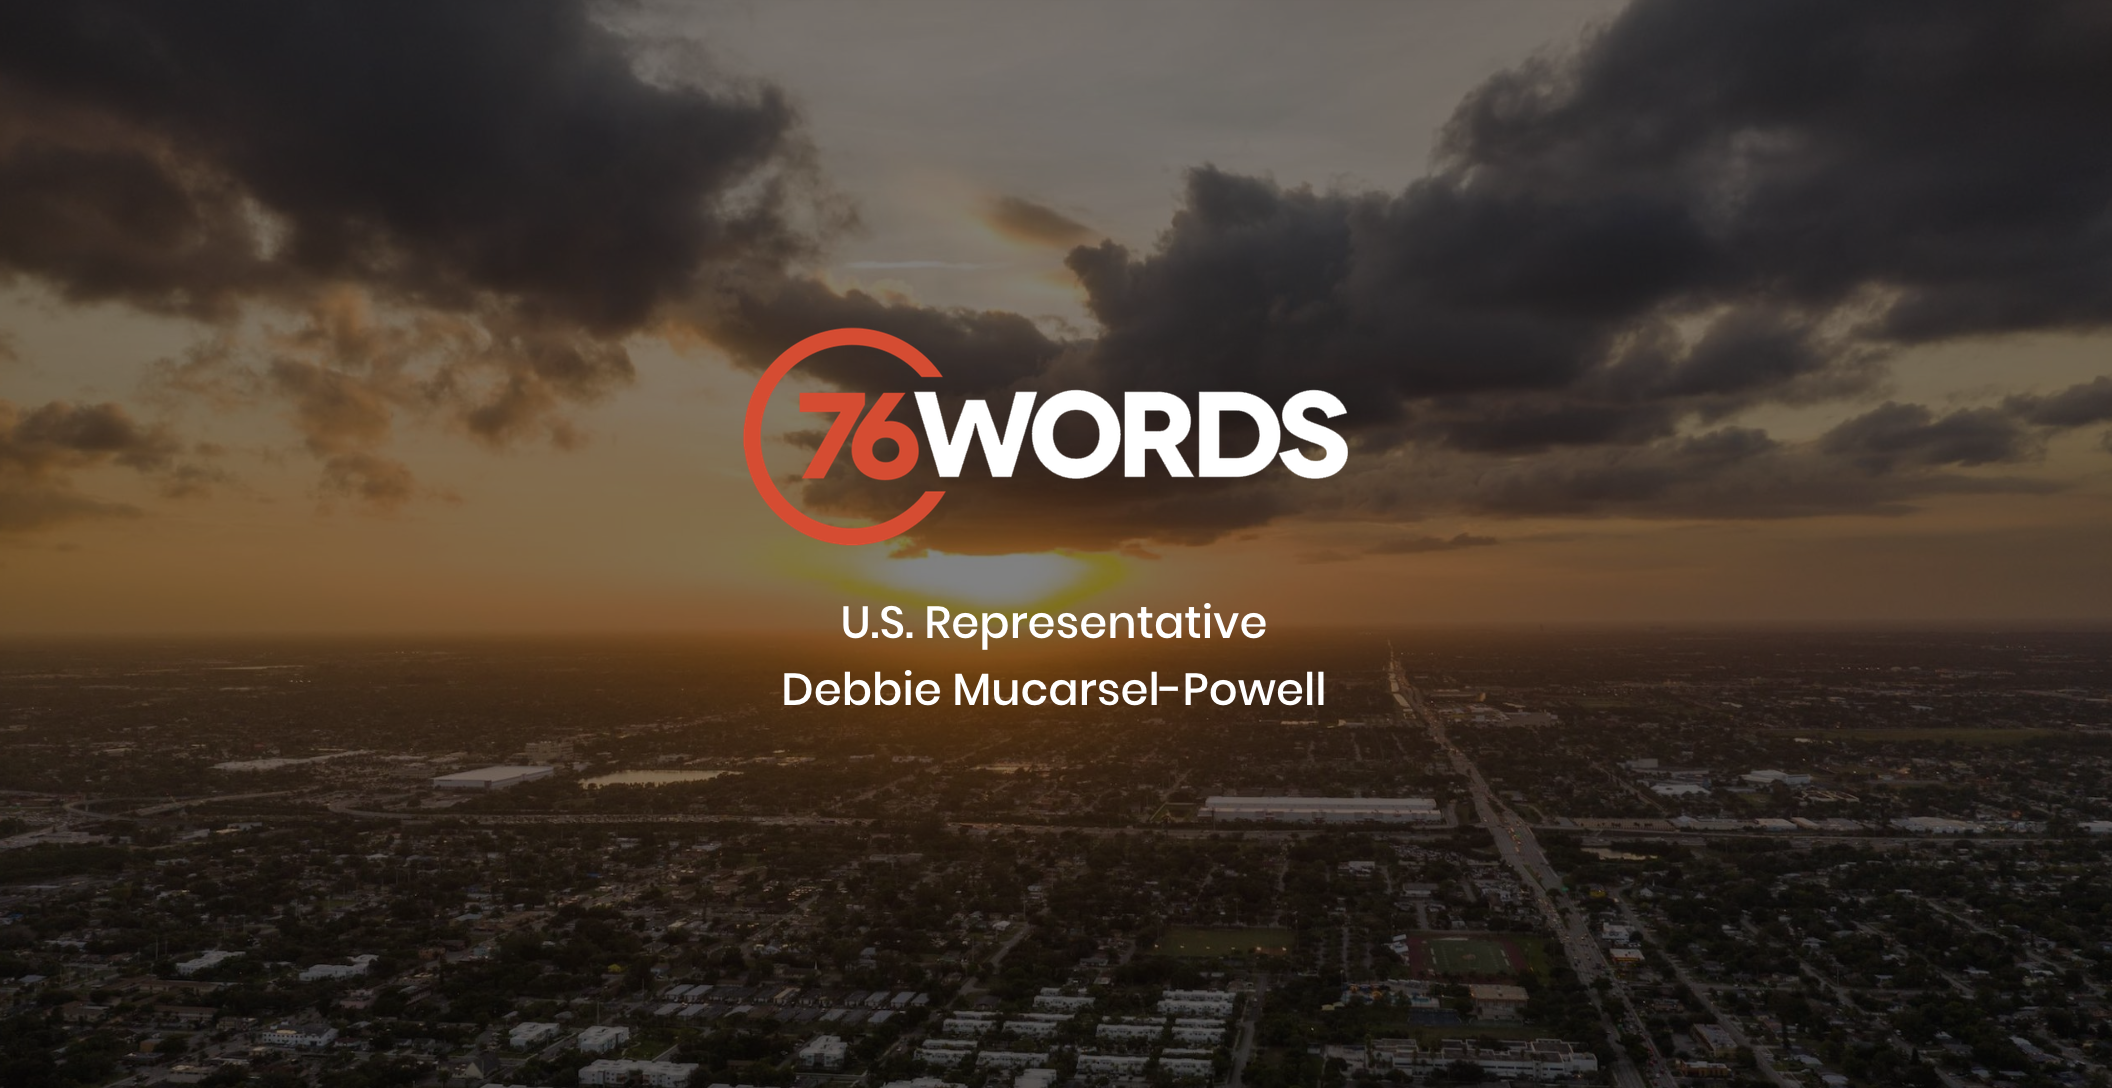 White and orange 76 Words U.S. Representative Debbie Mucarsel Powell logo with dimmed background showing aerial view of a city with the sun setting in the background